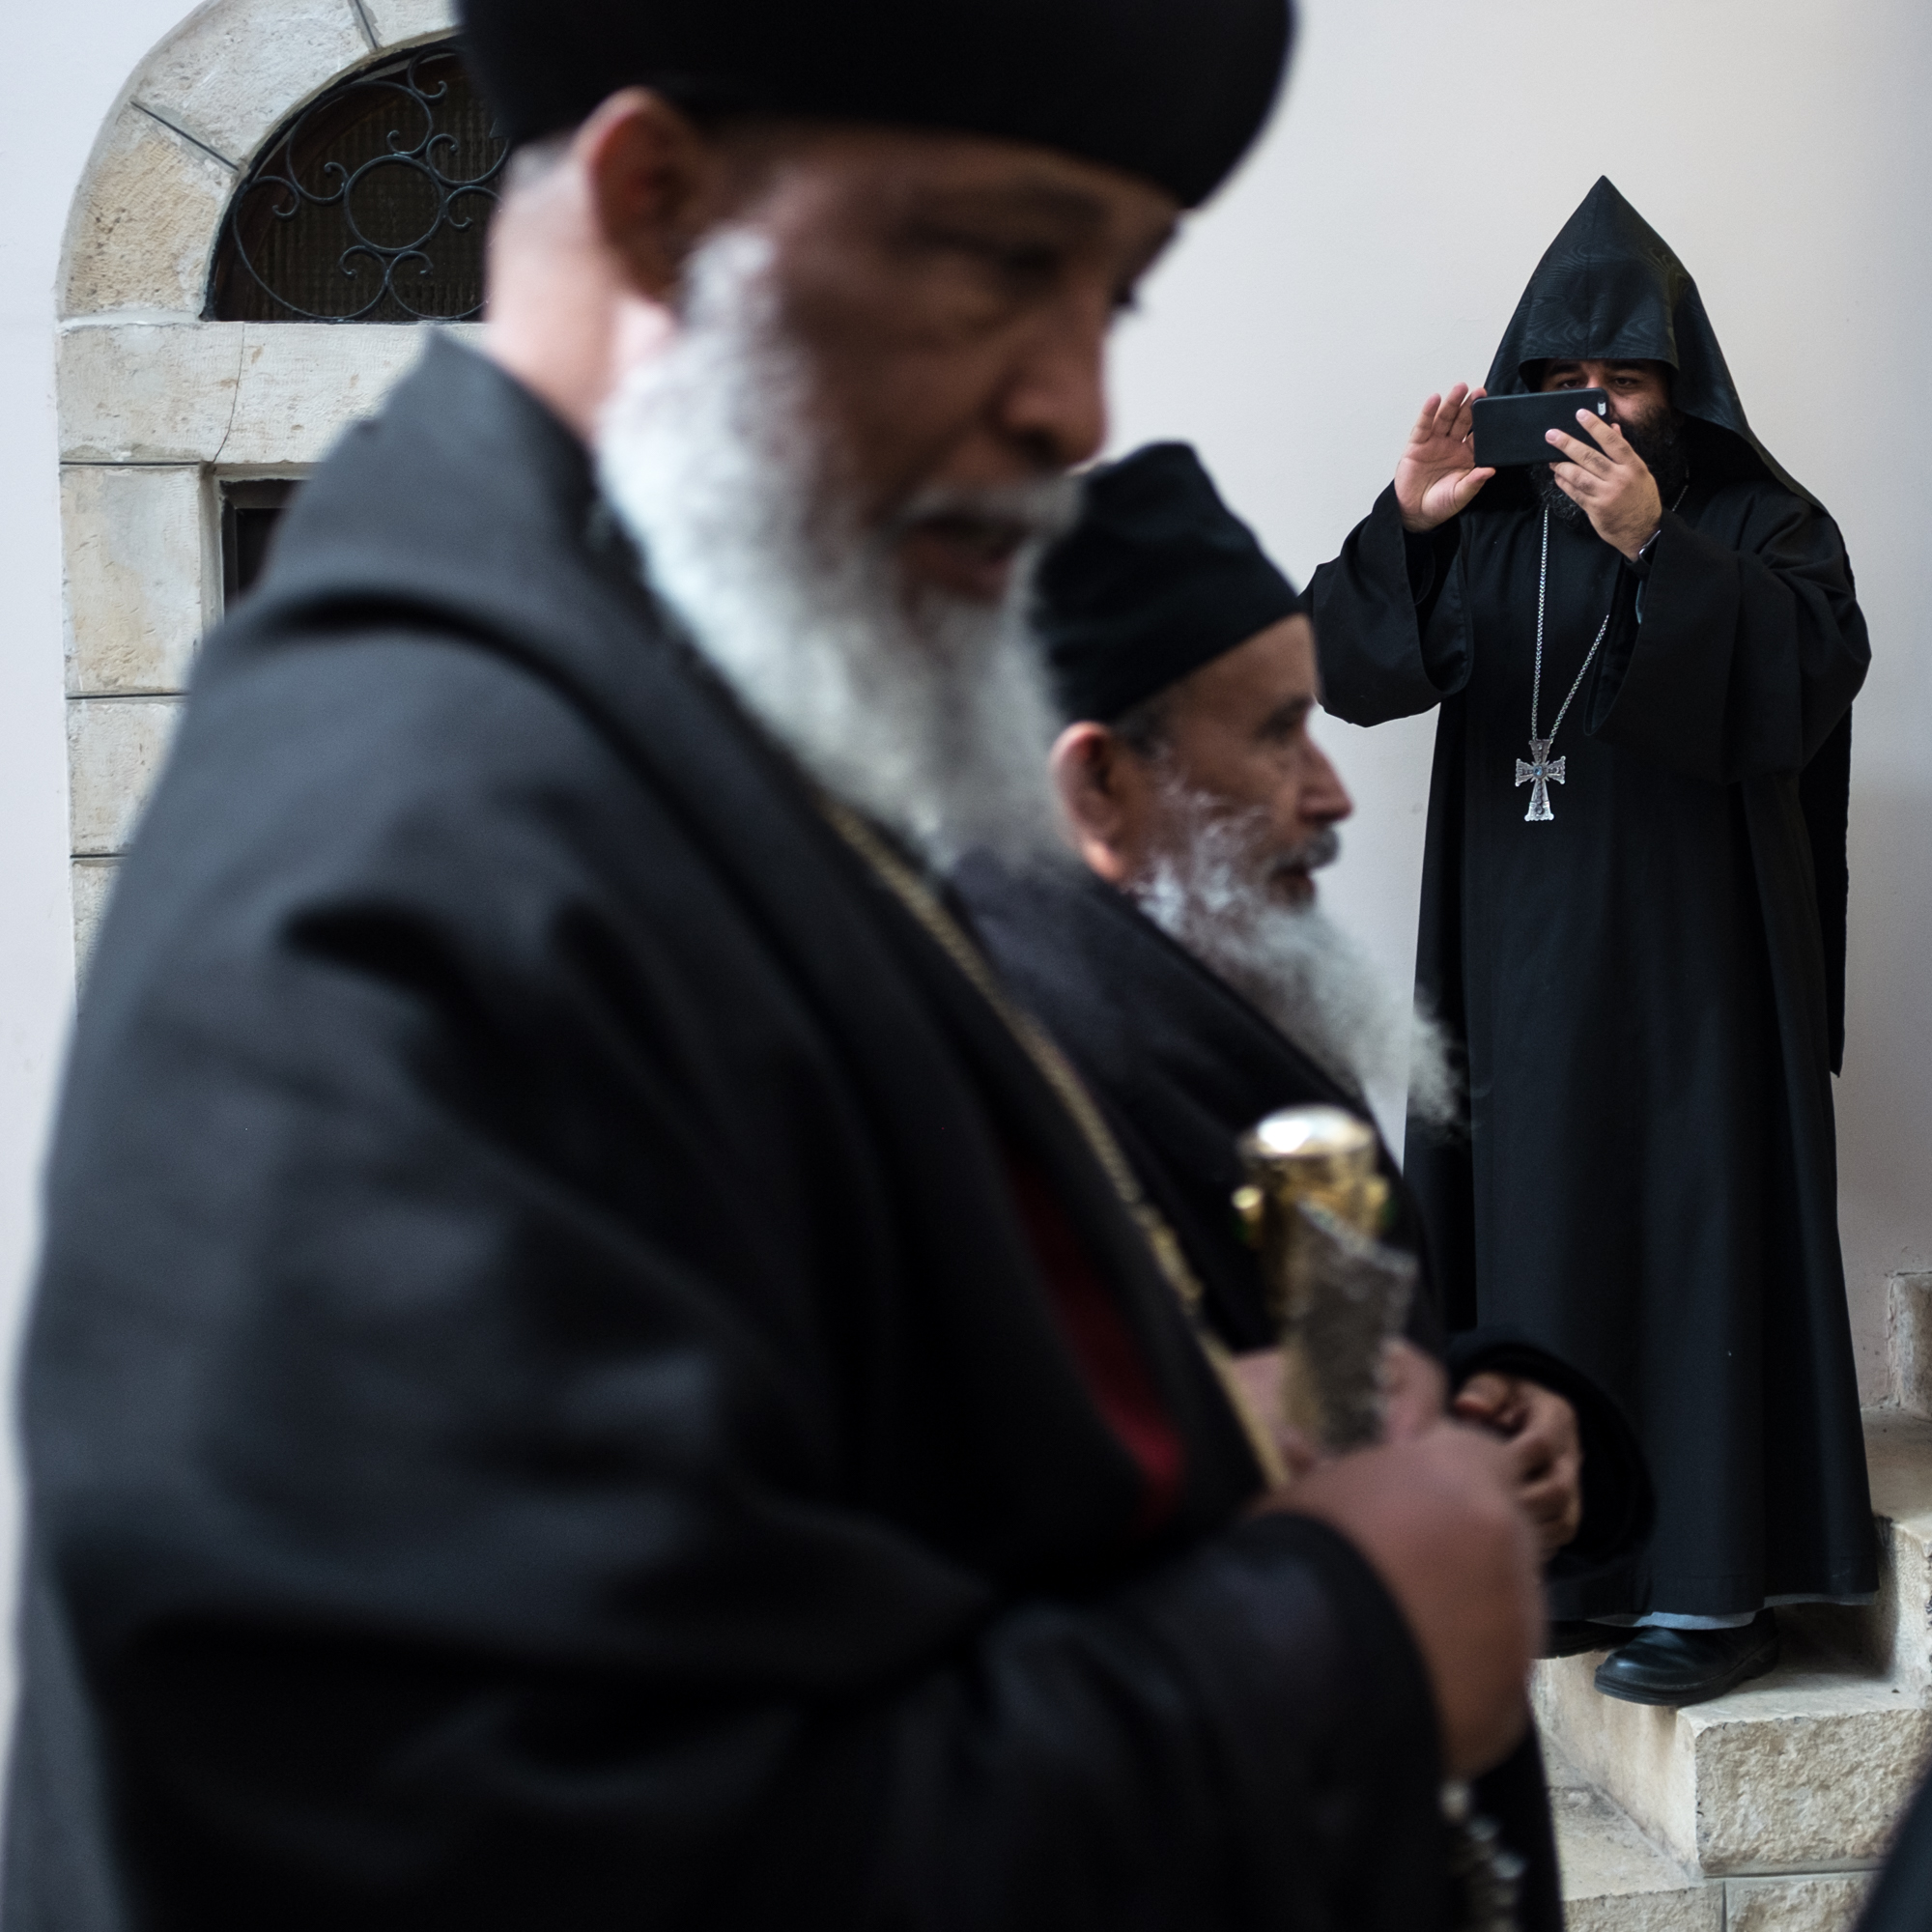 An Armenian monk photographs guests as they depart from a Christmas gathering.